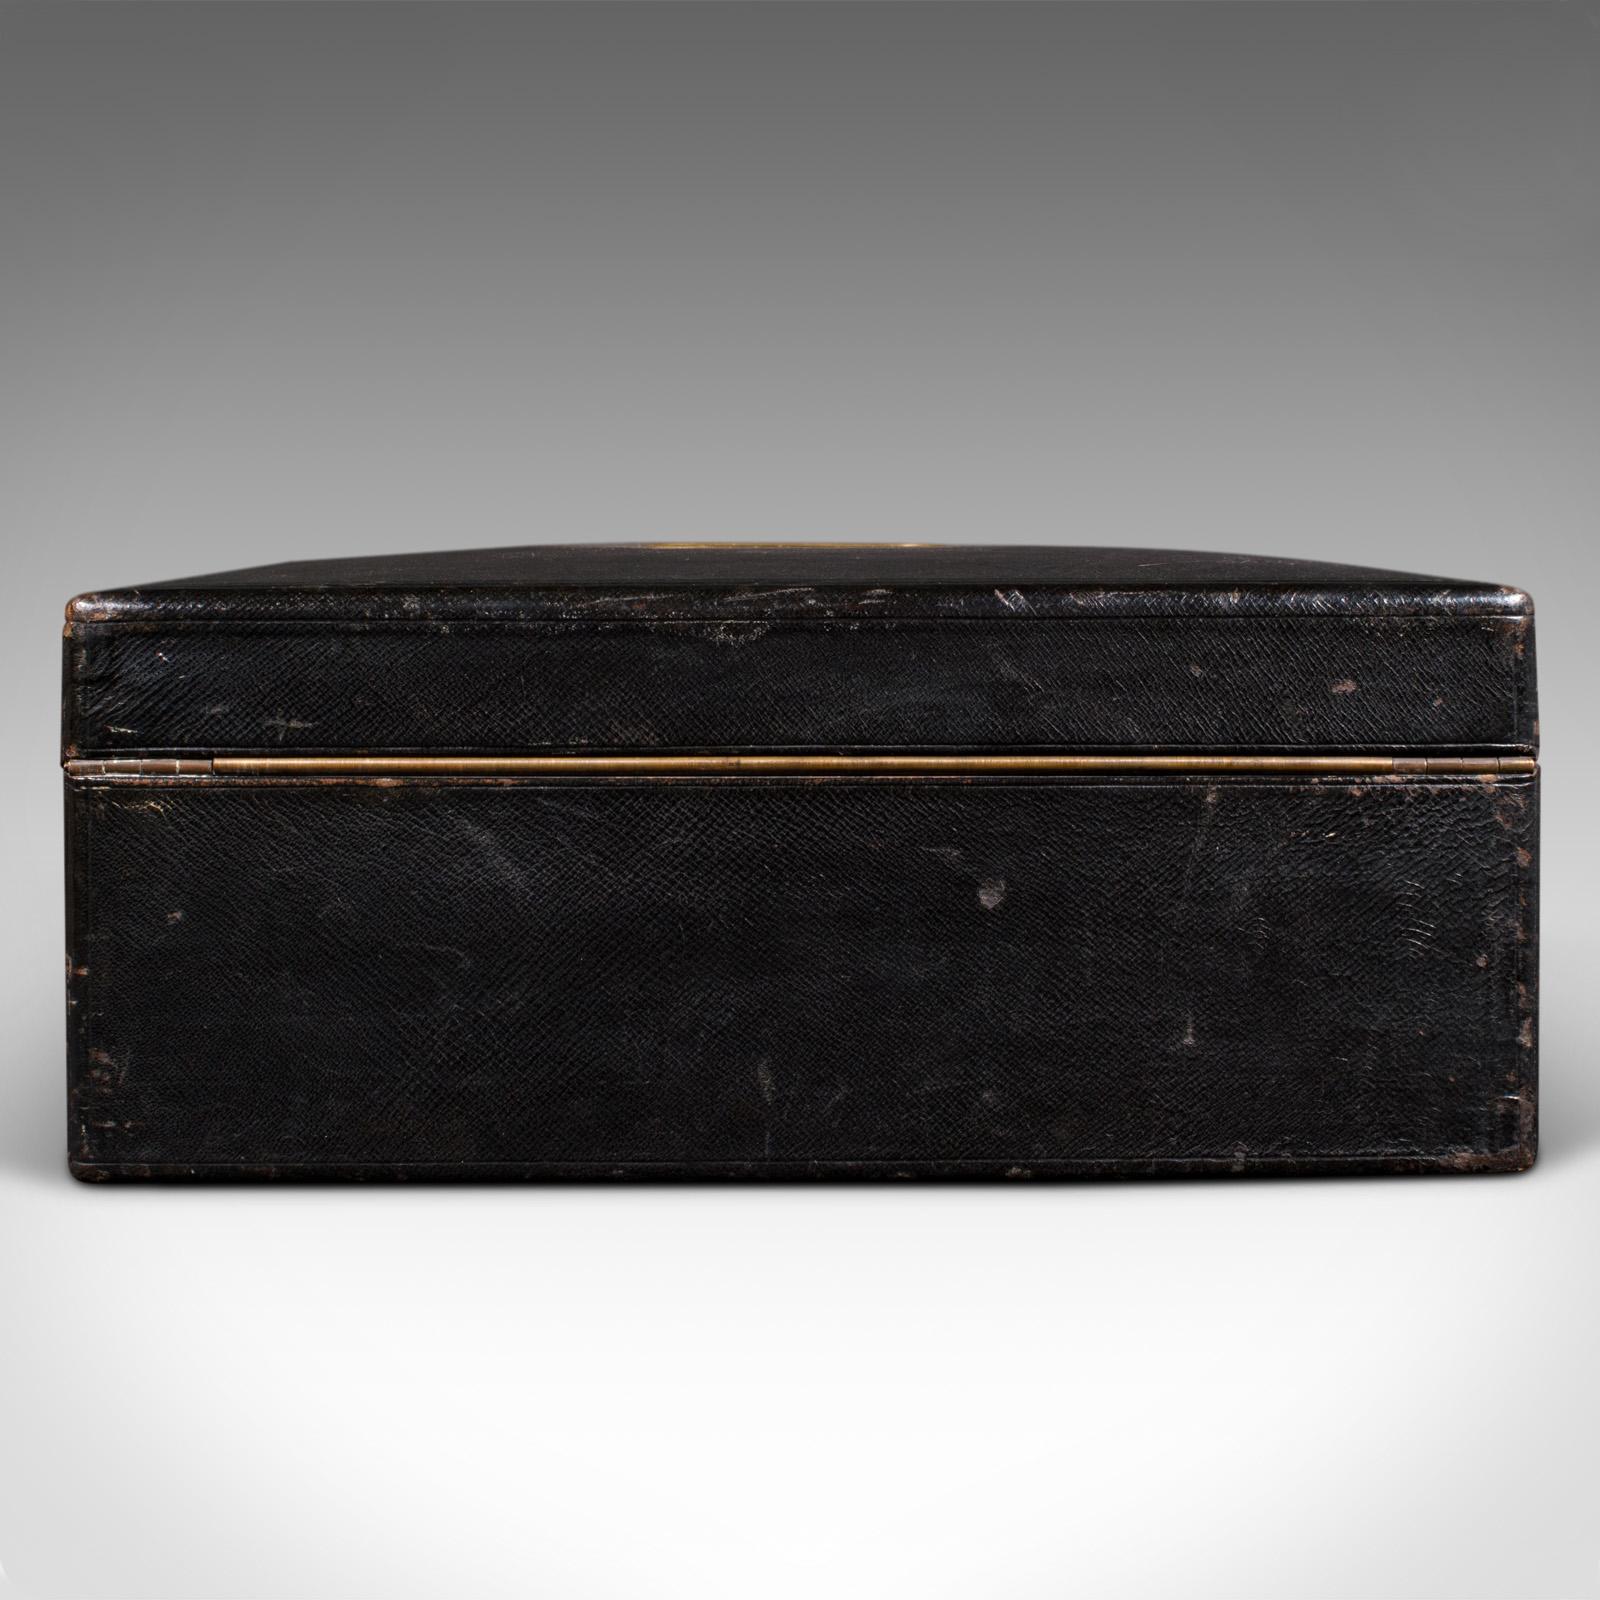 19th Century Antique Correspondence Box, English, Leather, Writing Case, Victorian, C.1890 For Sale